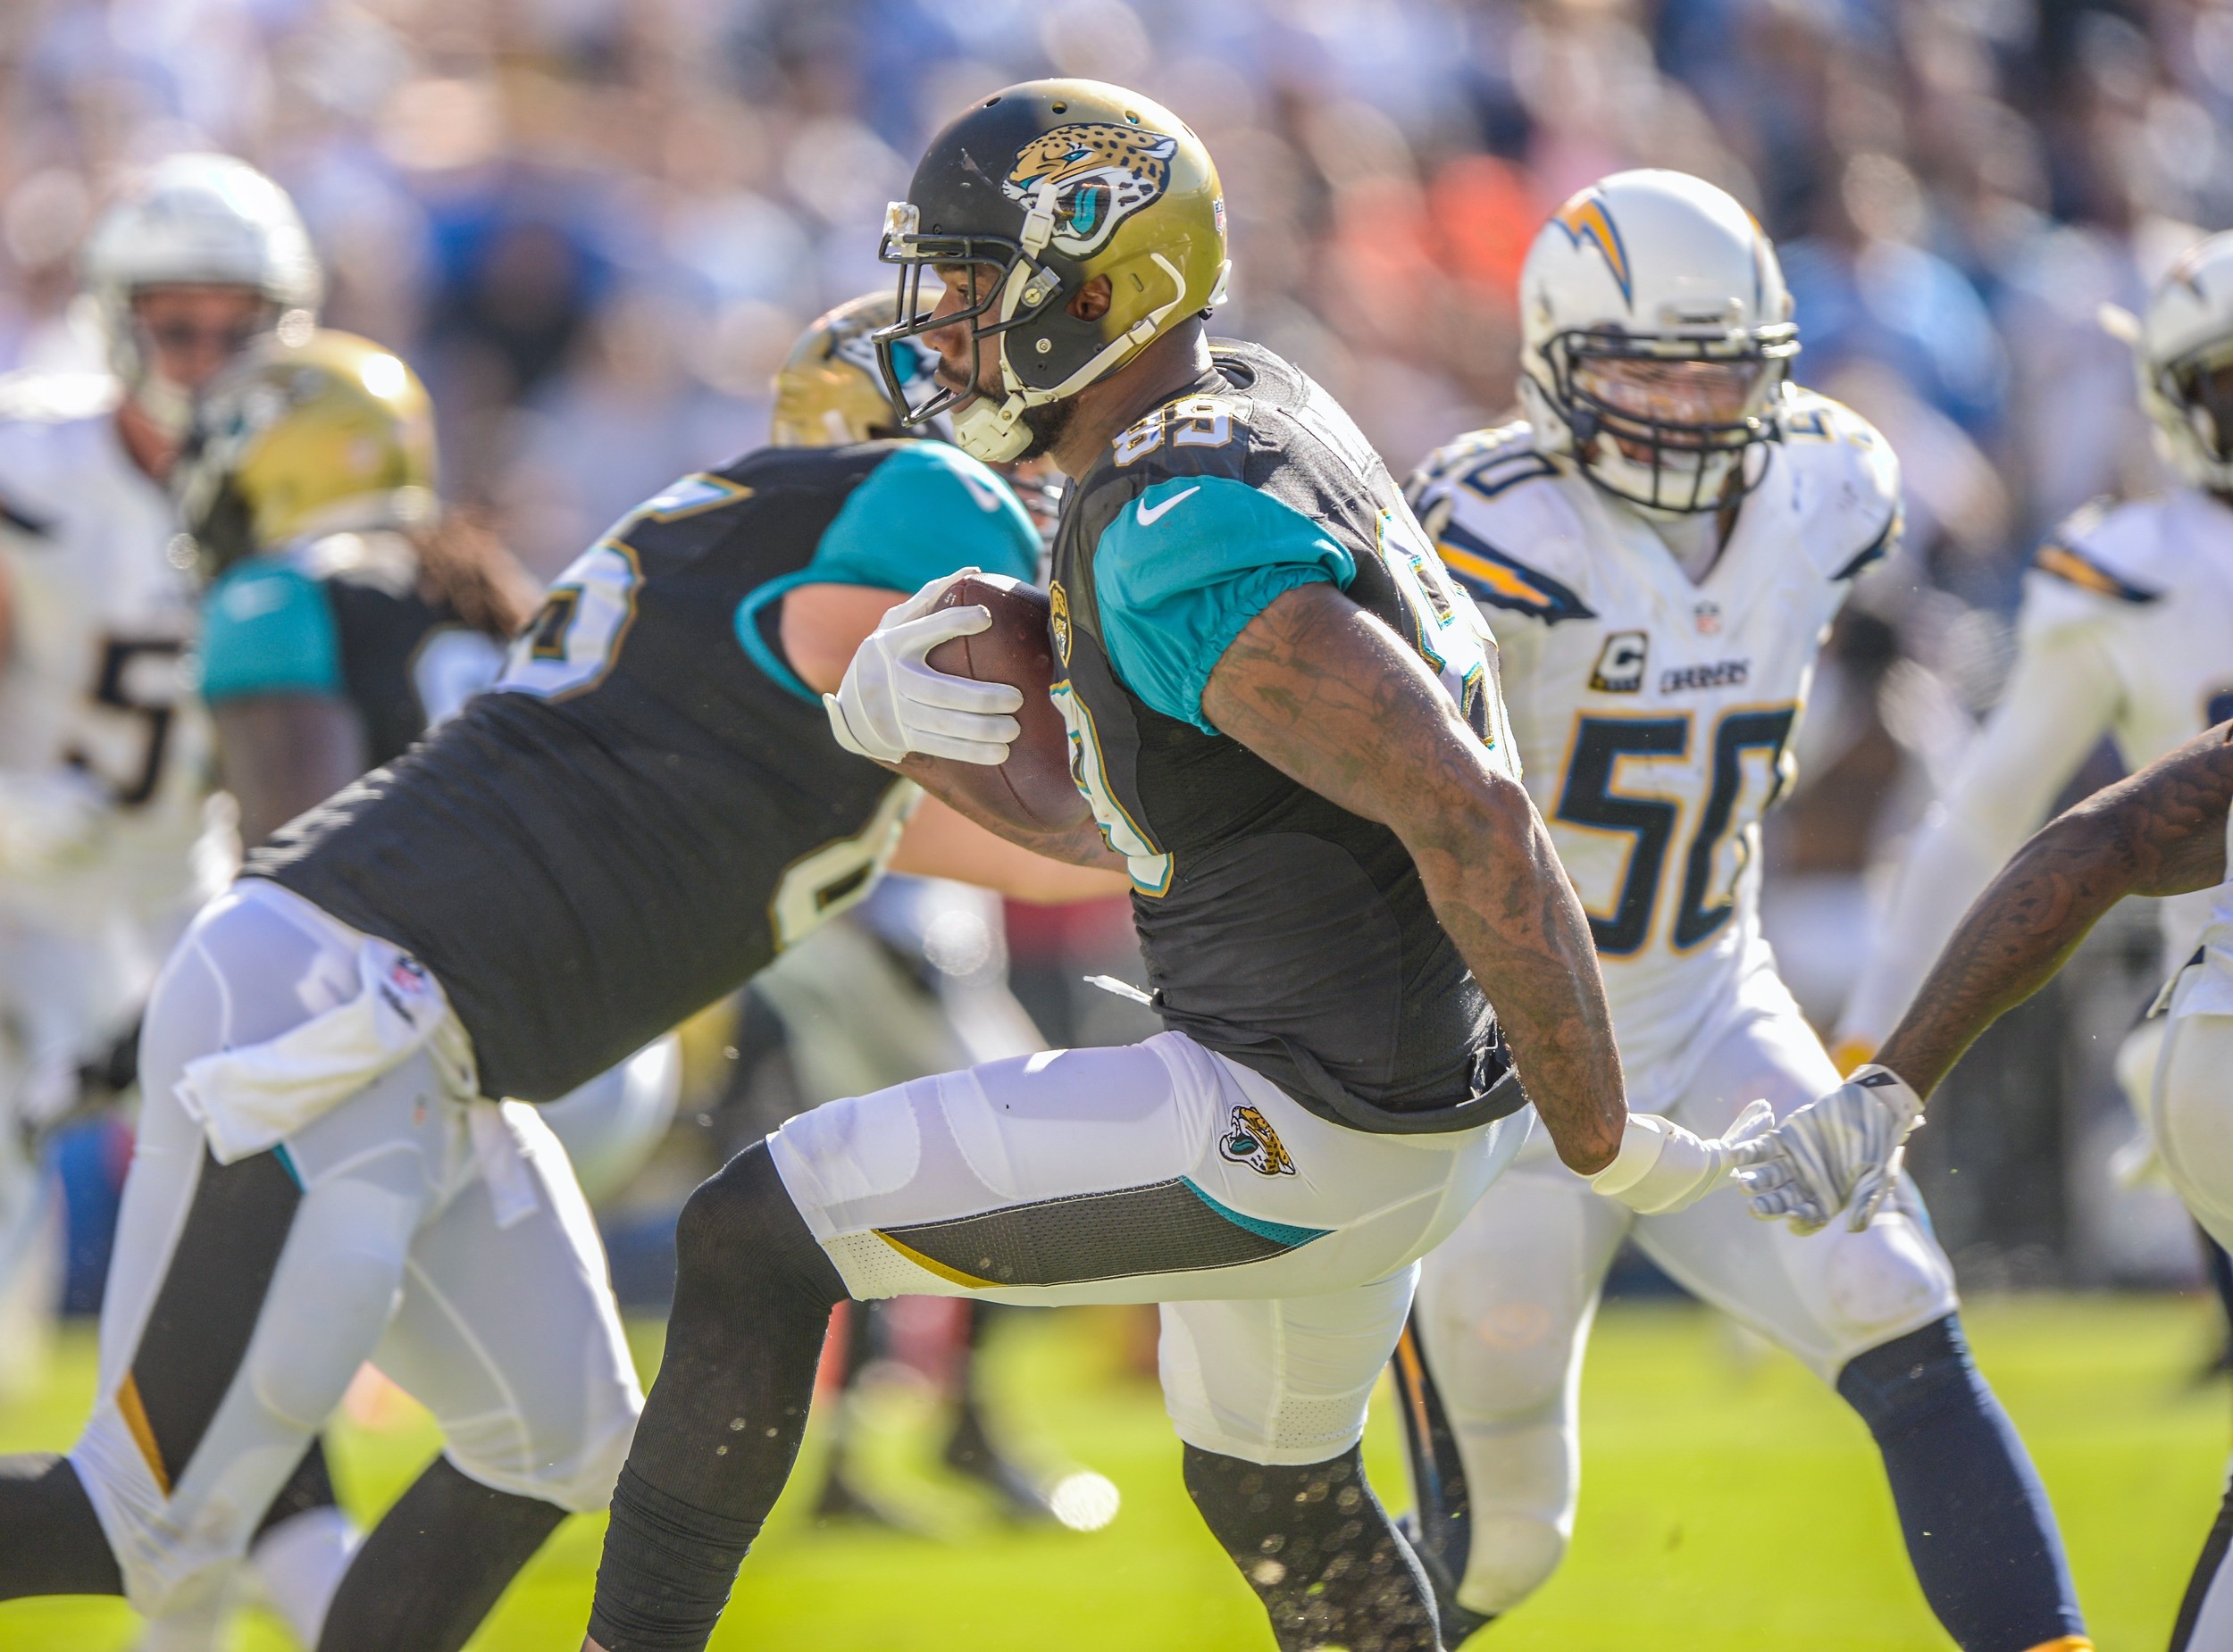 Jacksonville Jaguars QB Blake Bortles found tight end Marcedes Lewis (89) for a 4-yard touchdown pass in Sunday’s 38-14 loss to San Diego.